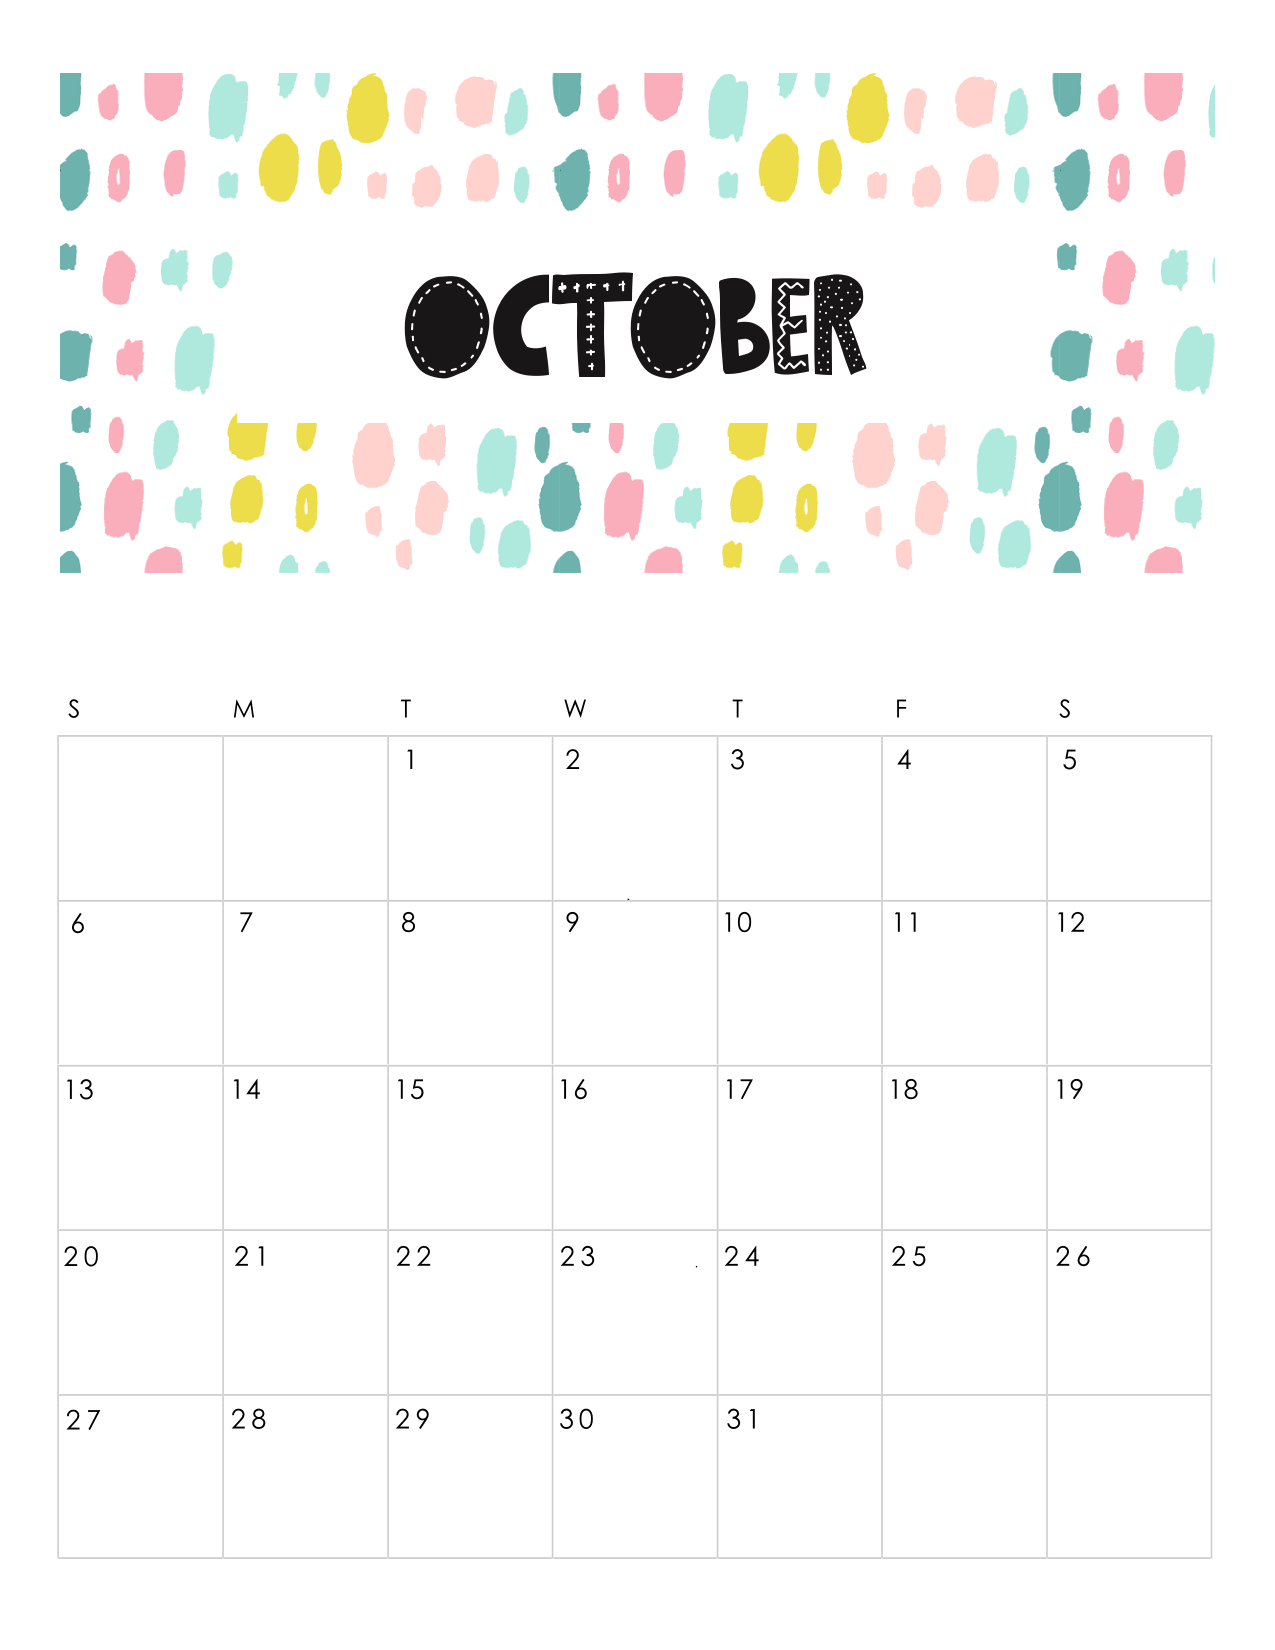 free-printable-abstract-patterned-calendar-2019-OCTOBER.JPG